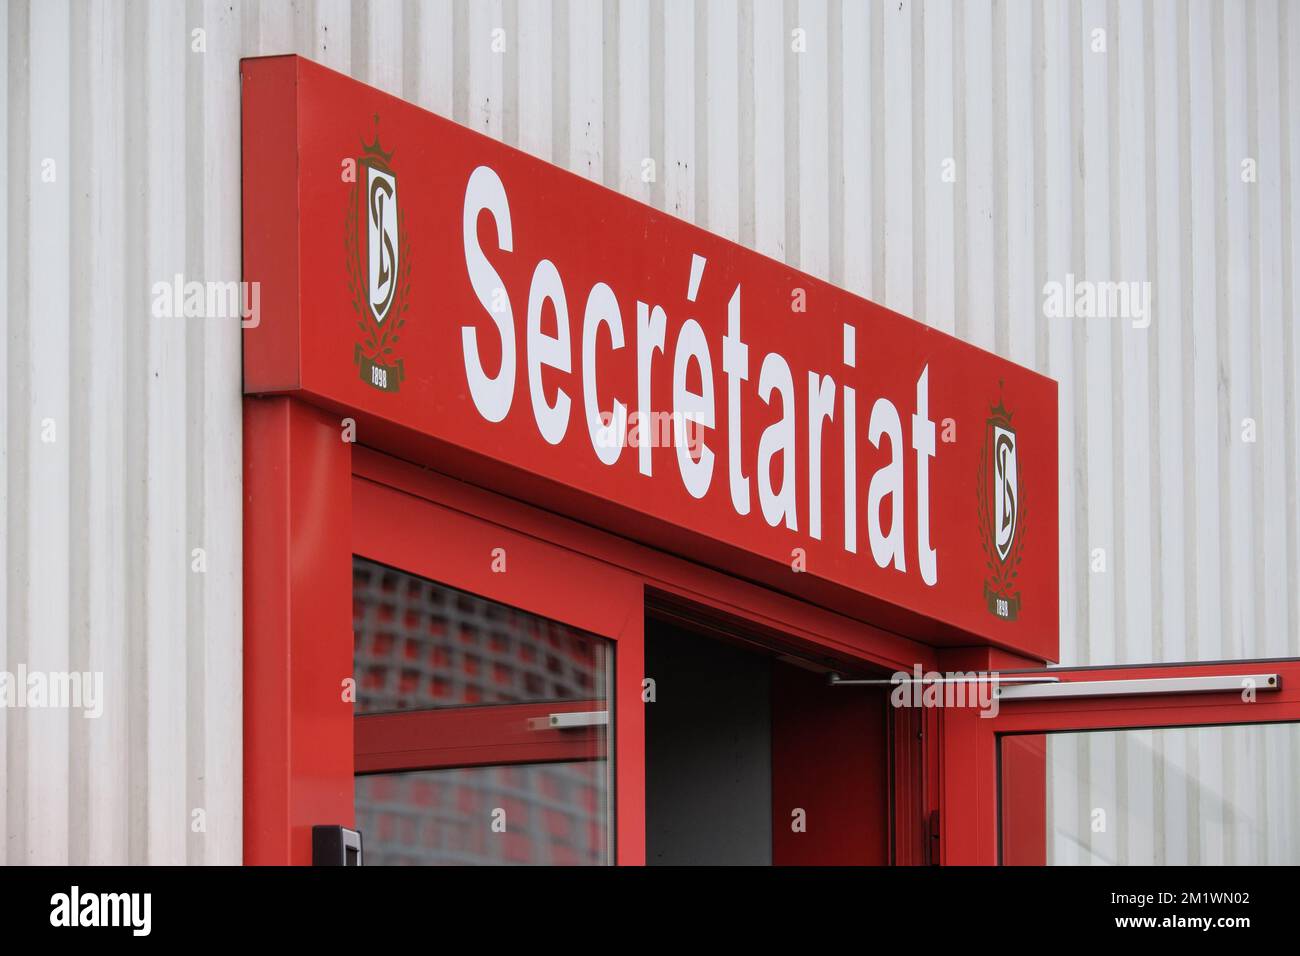 20141020 - LIEGE, BELGIUM: Illustration picture shows the Sclessin stadium of Belgian soccer team Standard de Liege, after a robbery took place this morning, Monday 20 October 2014. BELGA PHOTO NICOLAS LAMBERT Stock Photo